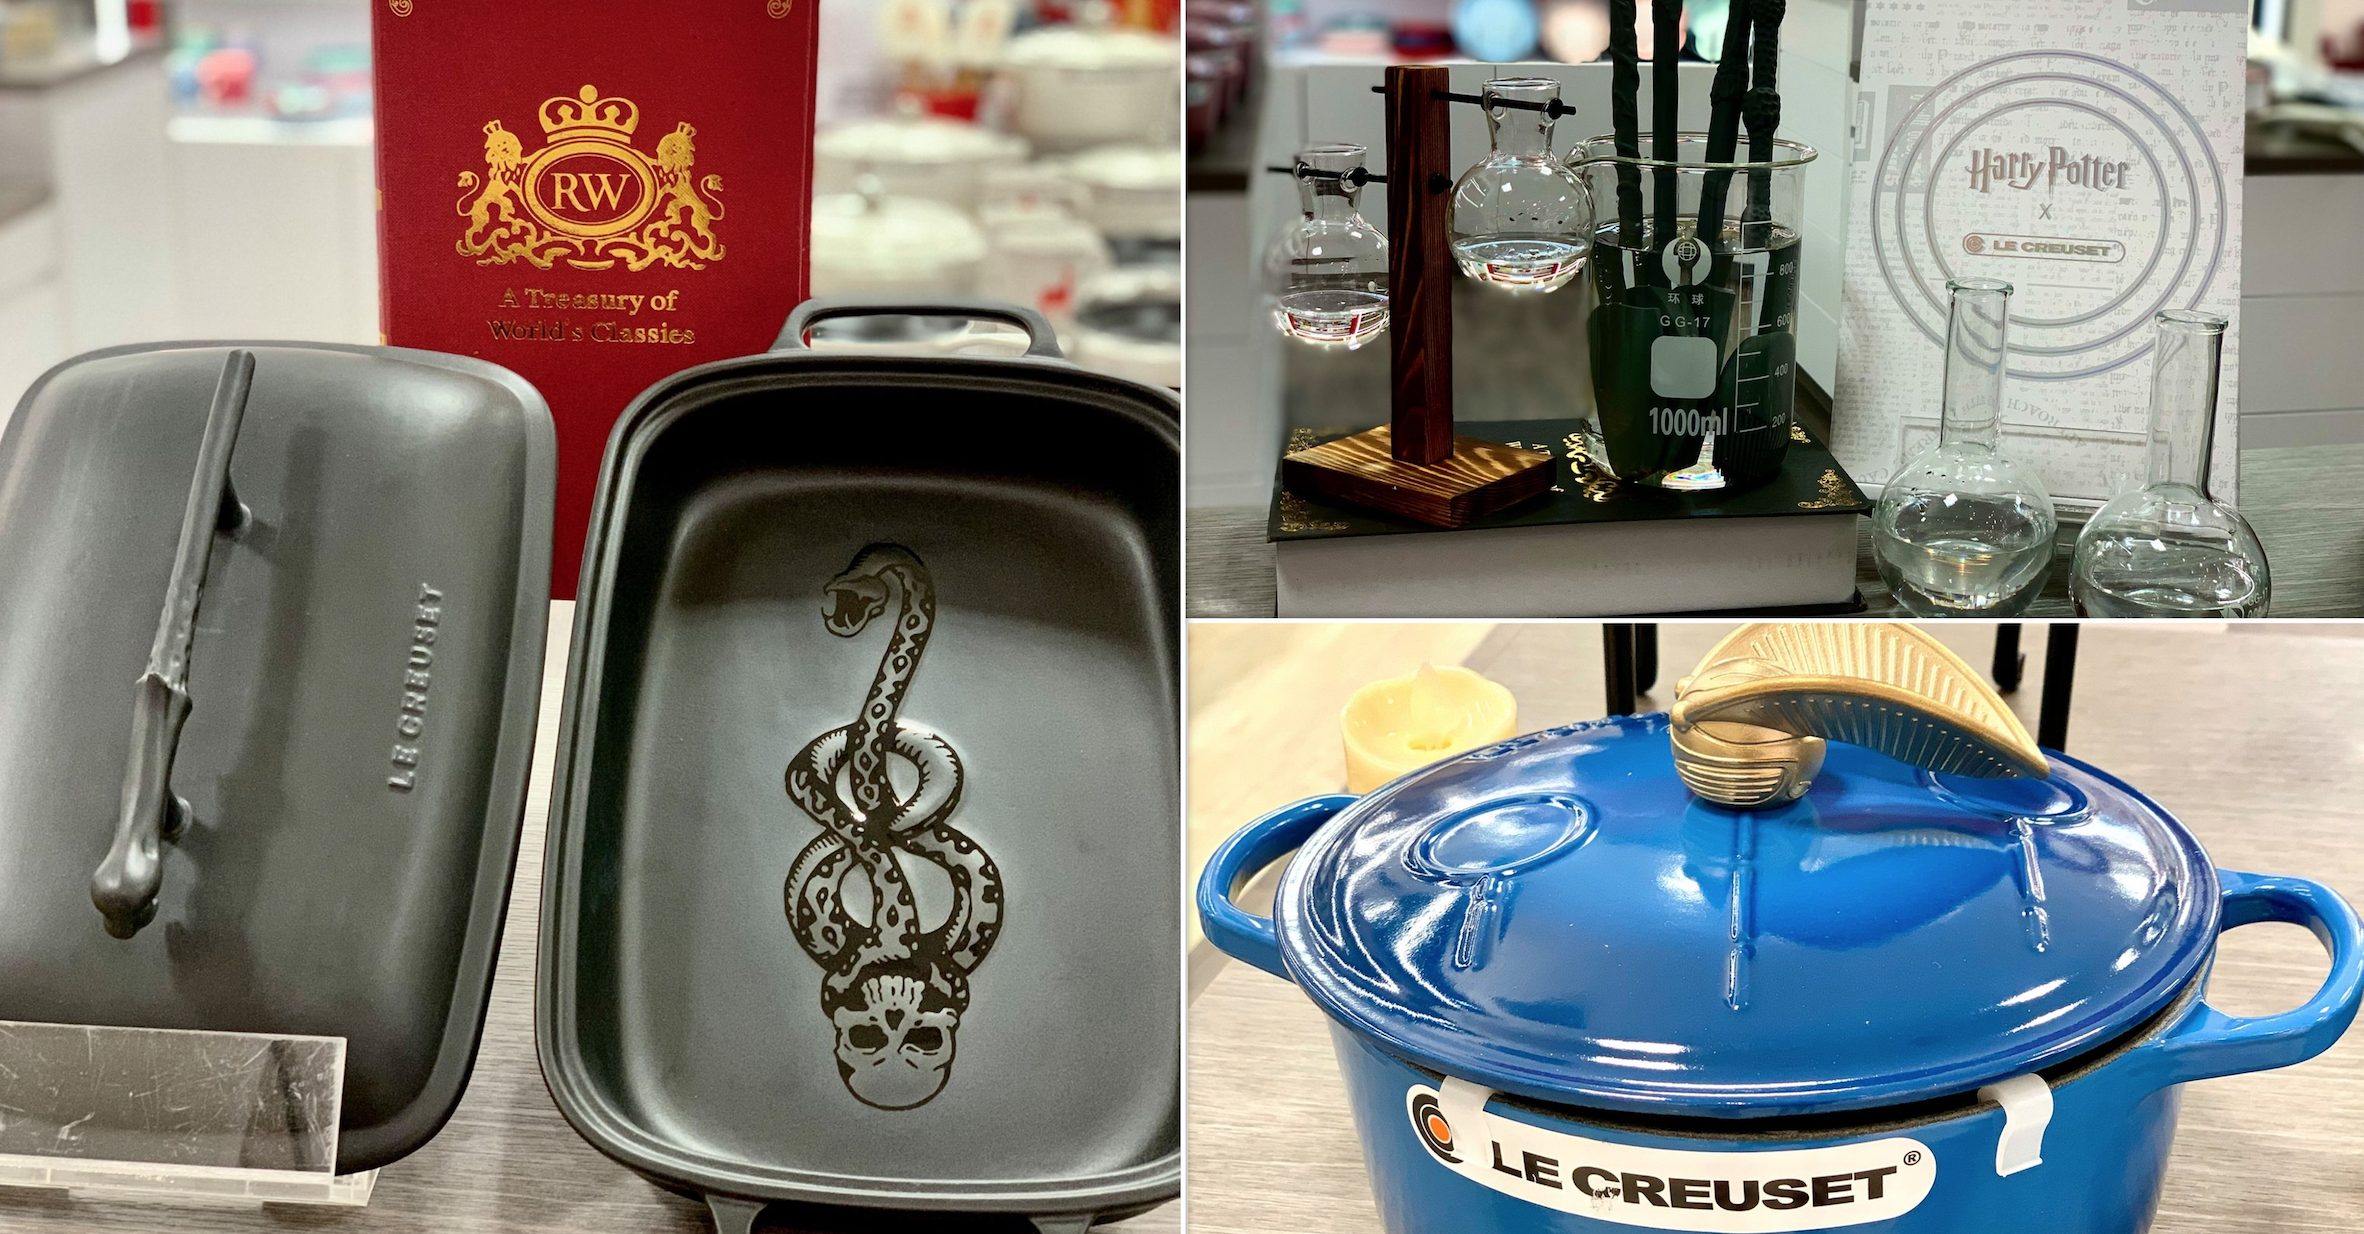 Harry Potter x Le Creuset collection now at Takashimaya S'pore